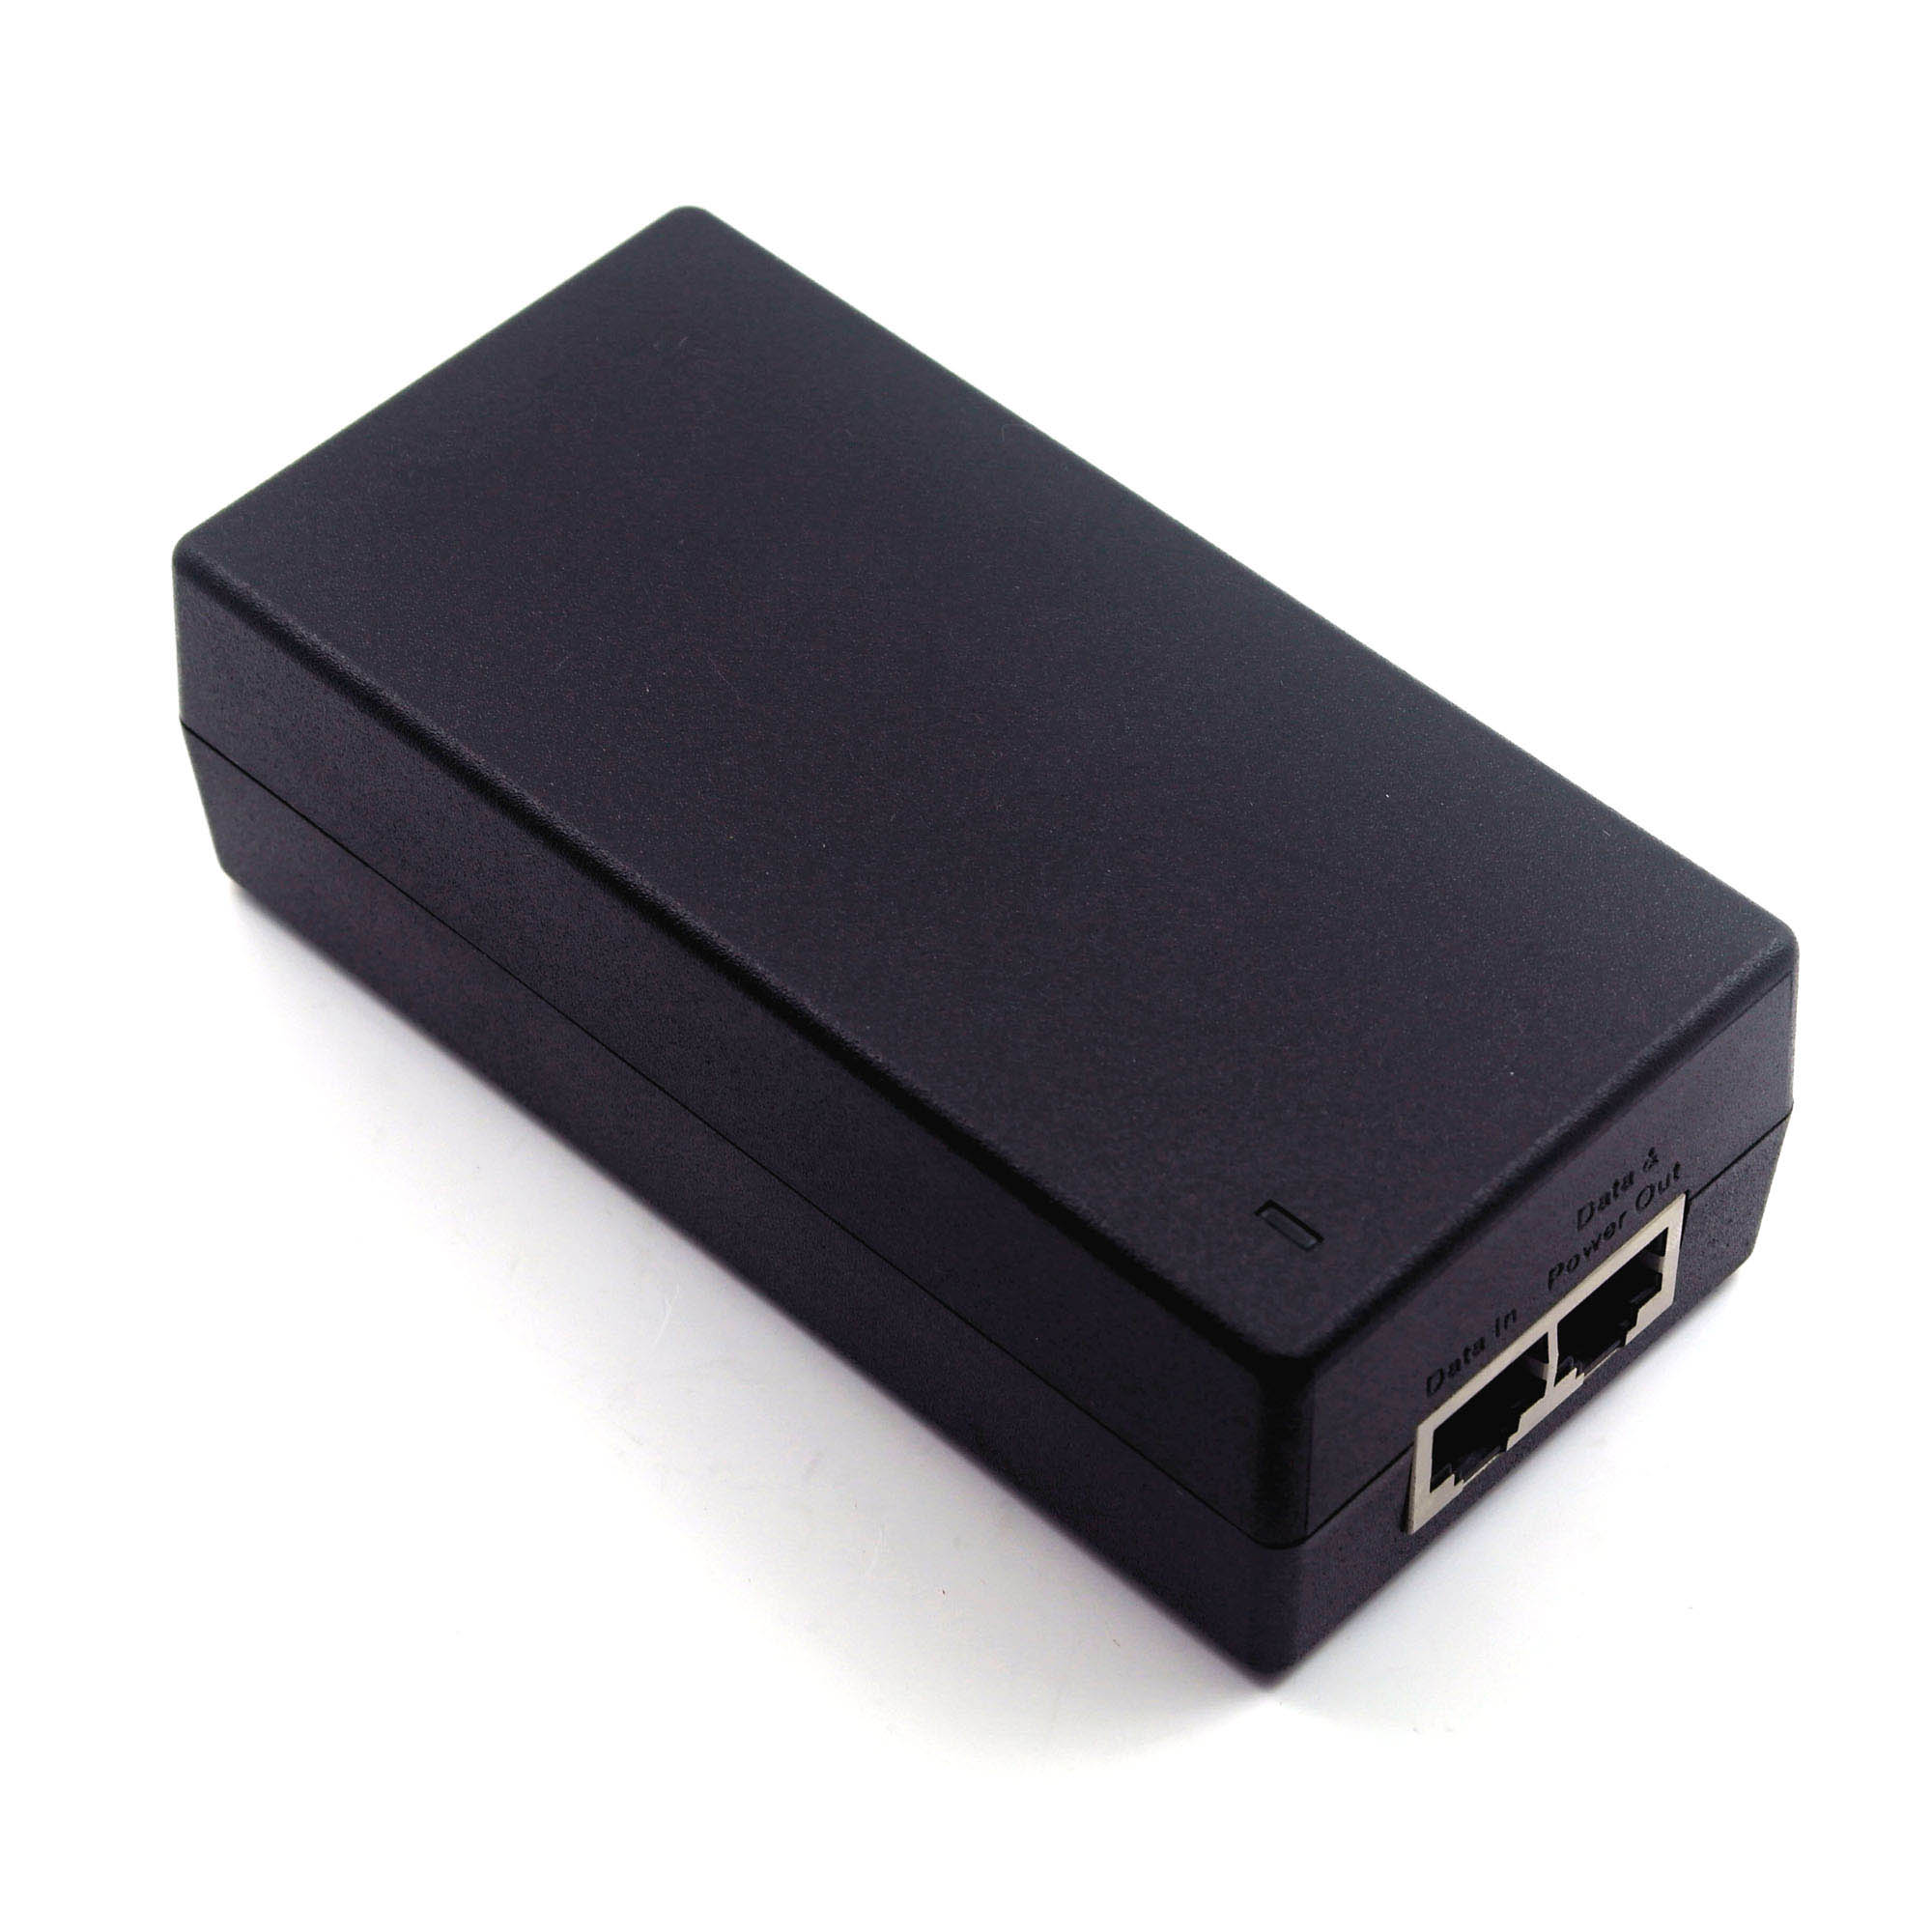 KRE-2401000D,24V 1A 24W POE injector, 24VDC 1A POE power adapter